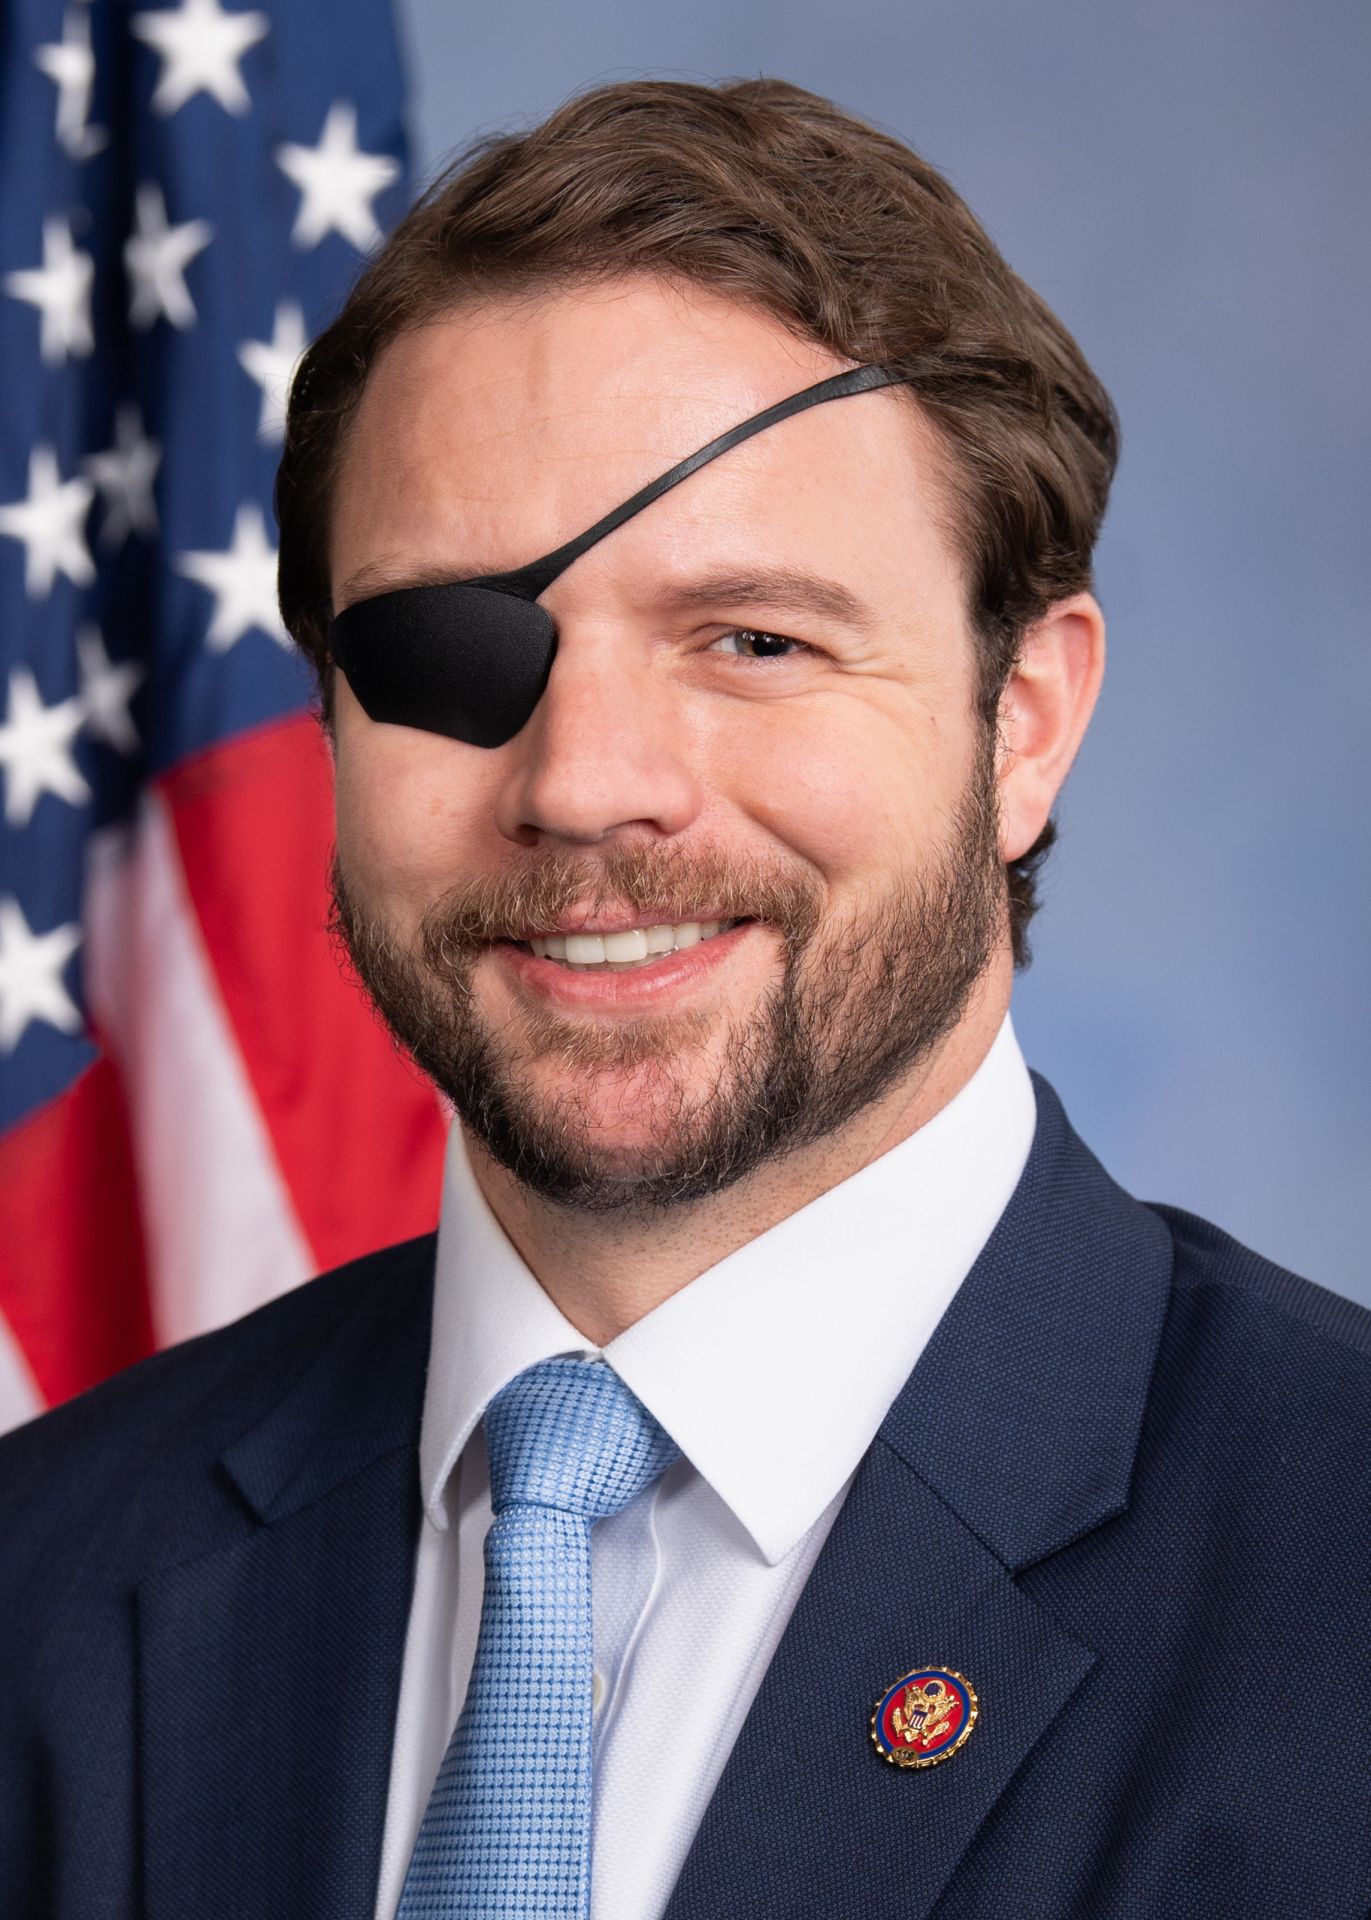 Rep. Dan Crenshaw writes op-ed for The Hill in support of nuclear